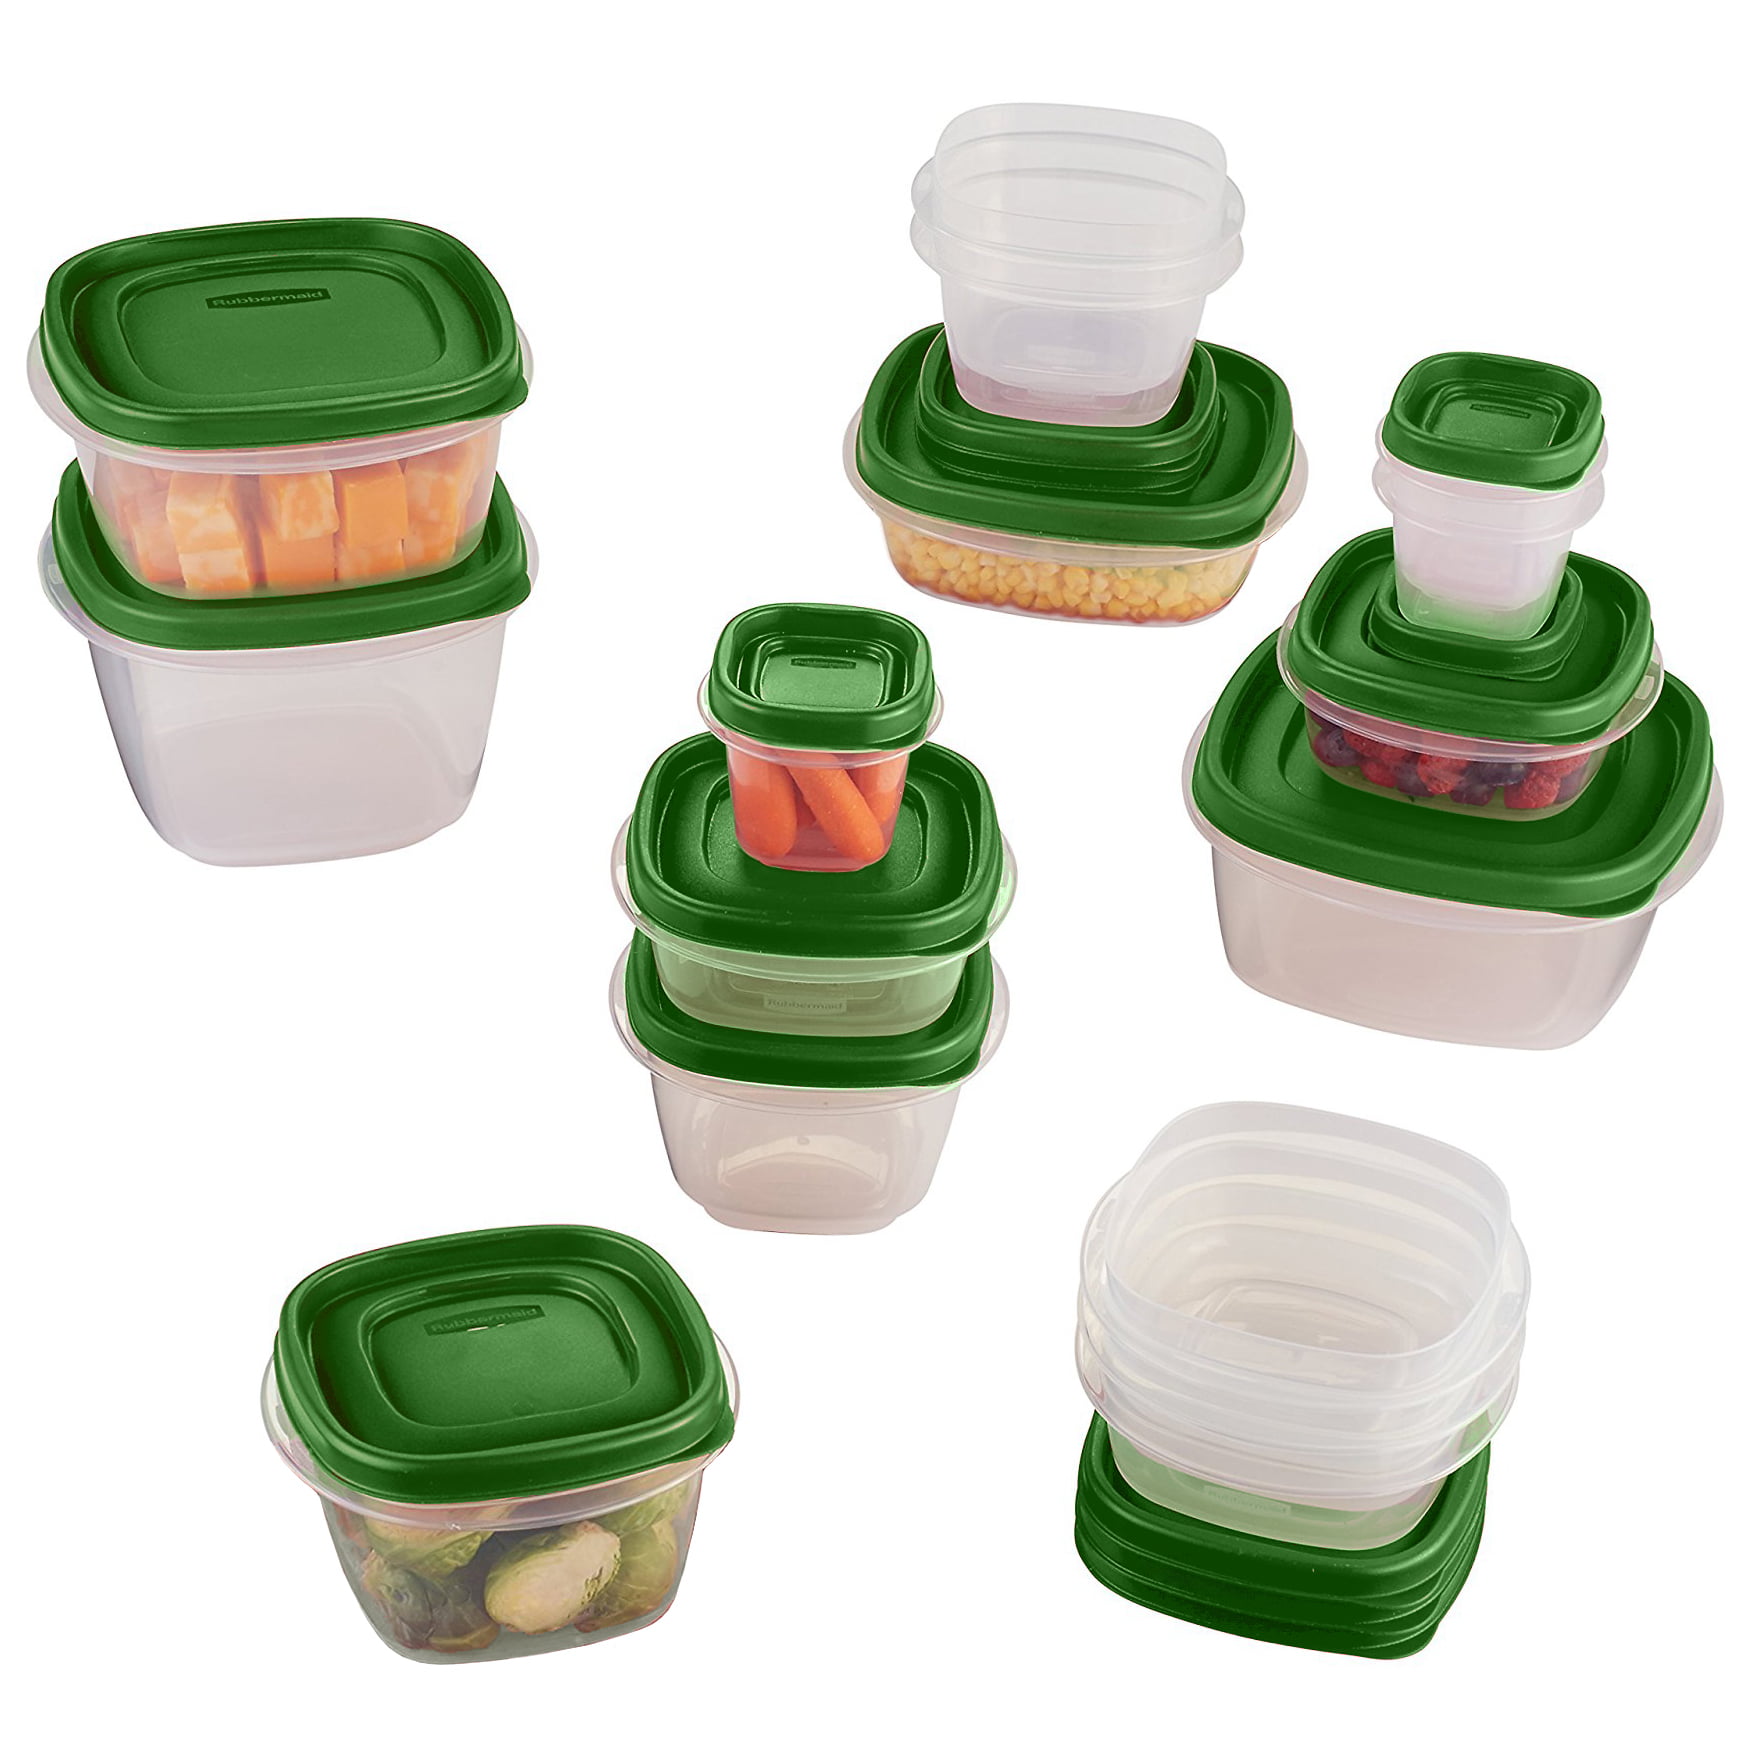 Rubbermaid 30pc Food Storage Container Set with Easy Find Lids